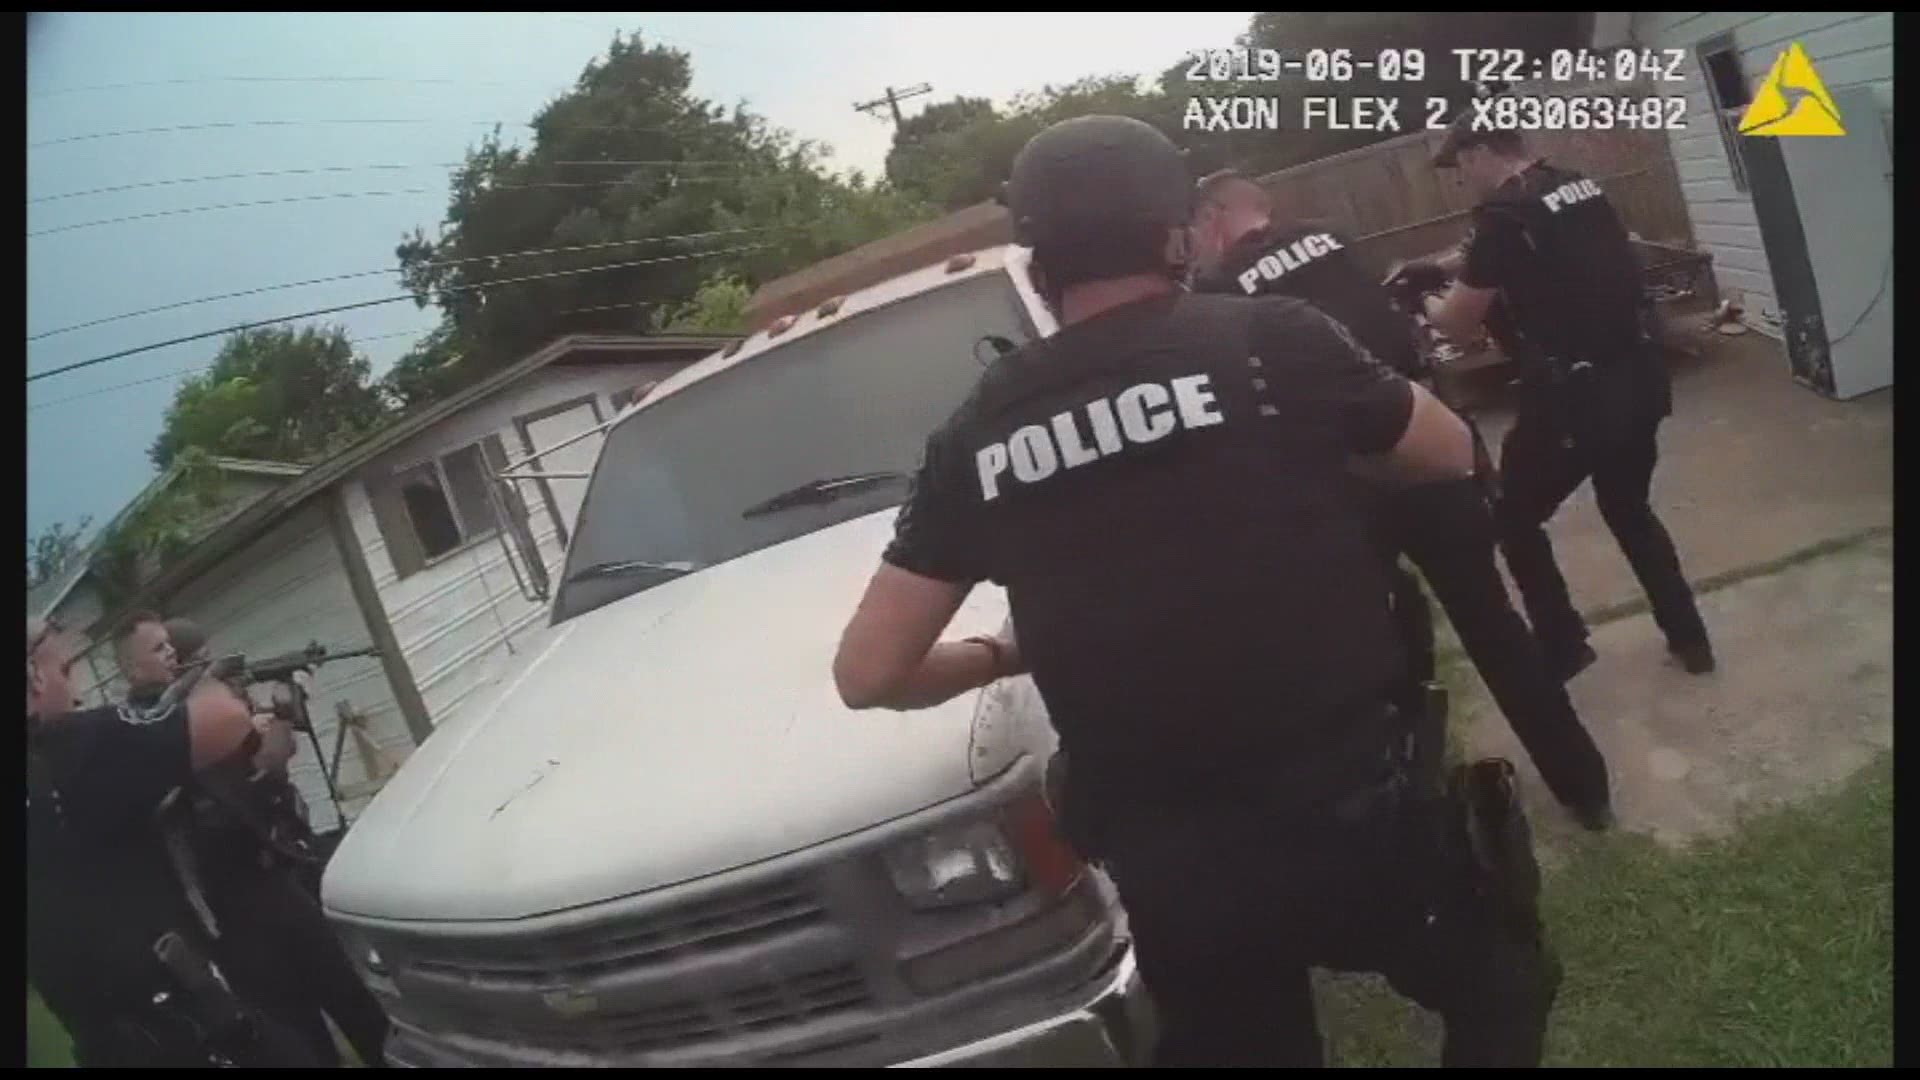 (Warning: Disturbing video and language) Fort Worth police officers shot and killed 20-year-old JaQuavion Slaton on June 9. Interim police Chief Ed Kraus said Slaton made an "overt movement" that caused officers to "fear for their lives."